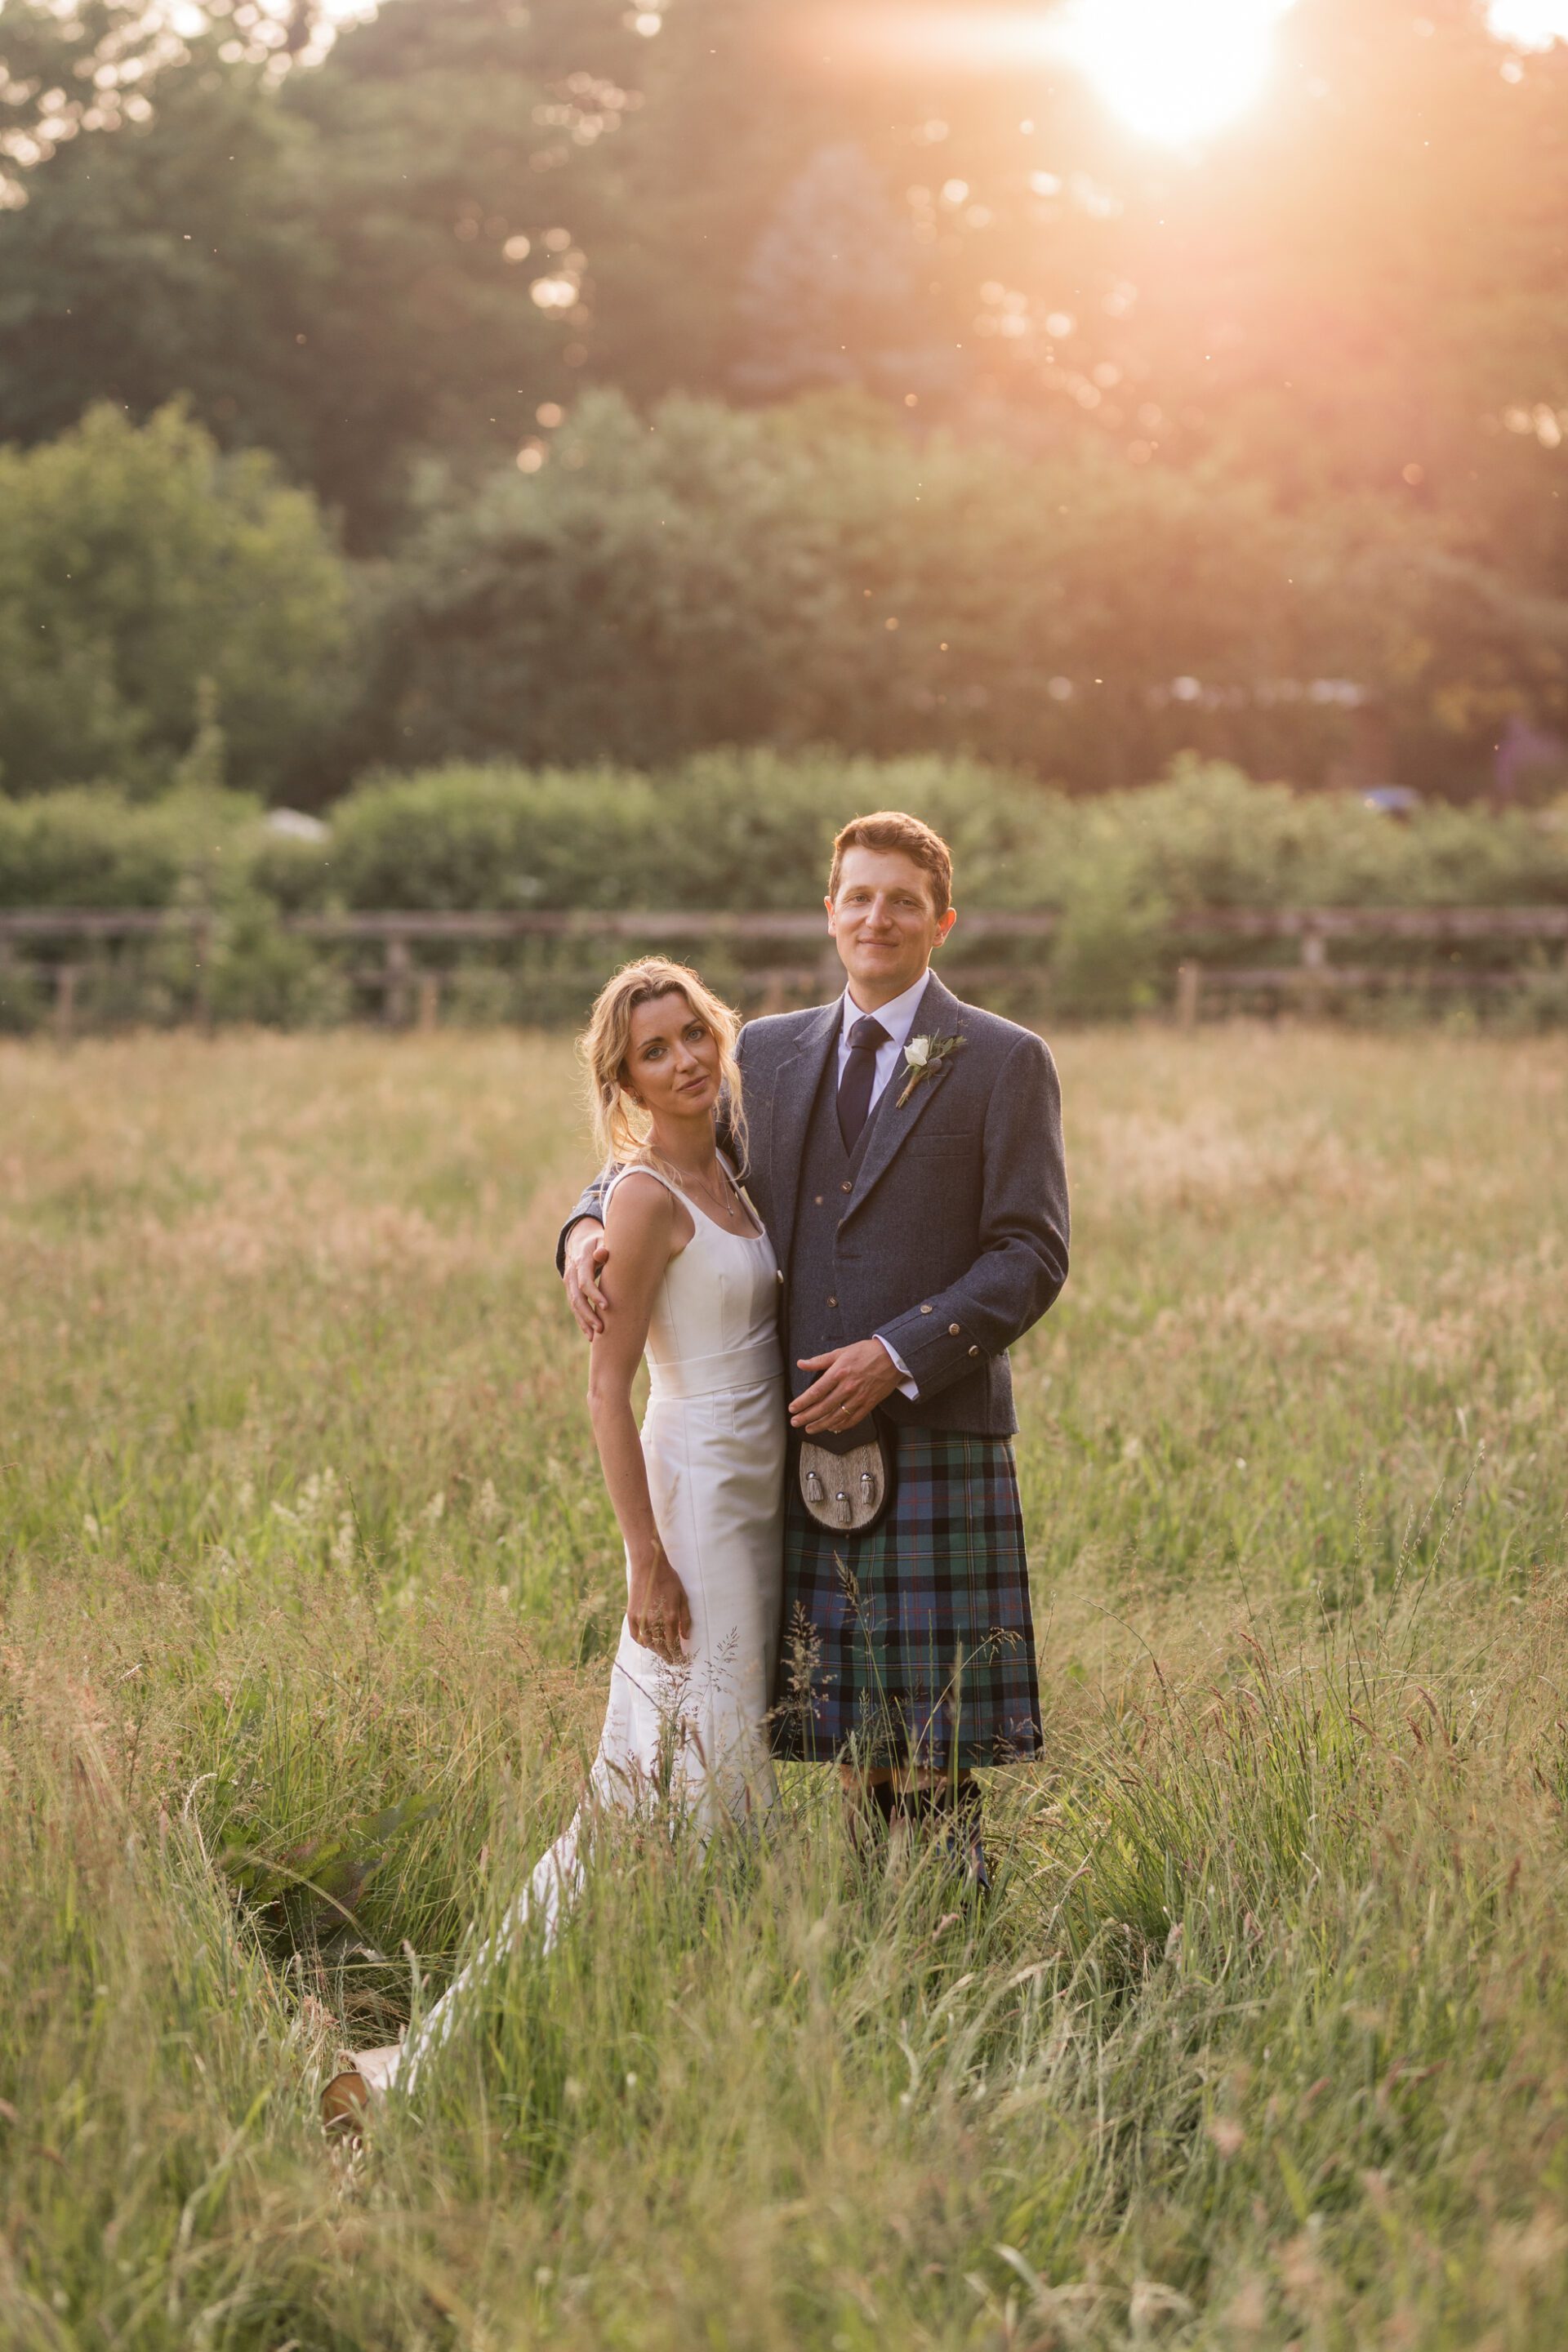 The bride and groom spend five minutes posing for golden hour couples portraits at their Devon marquee wedding